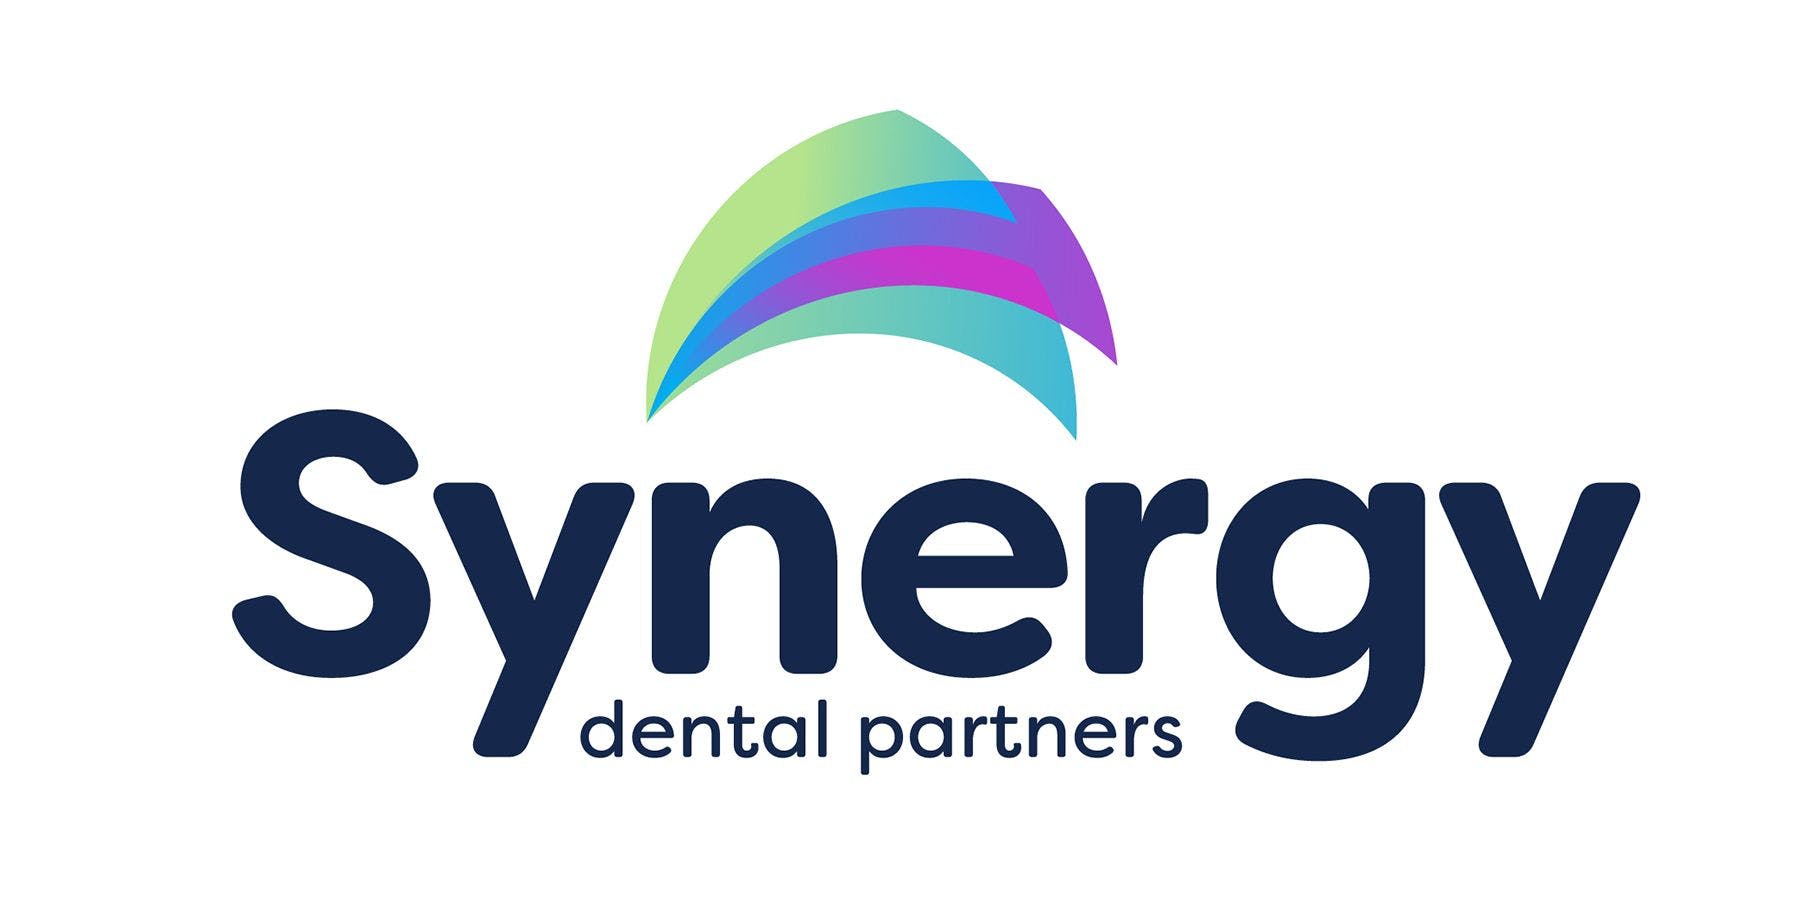 Buying Group Synergy Dental Partners Acquires Dental Whale Savings Network | Image Credit: © Synergy Dental Partners